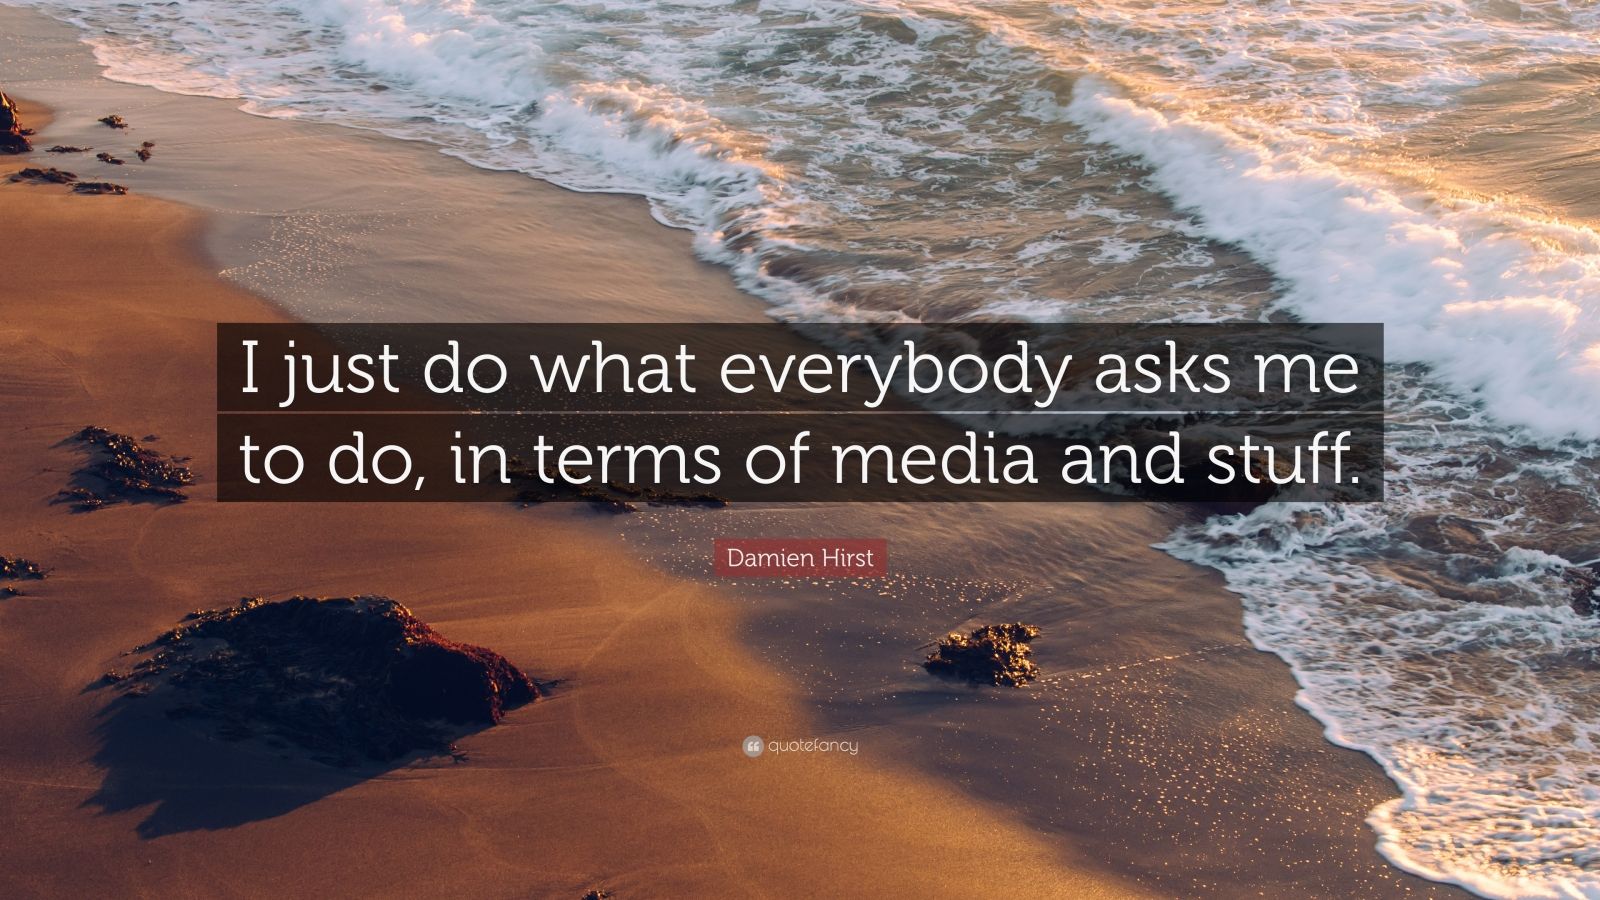 Damien Hirst Quote: "I just do what everybody asks me to do, in terms of media and stuff." (7 ...